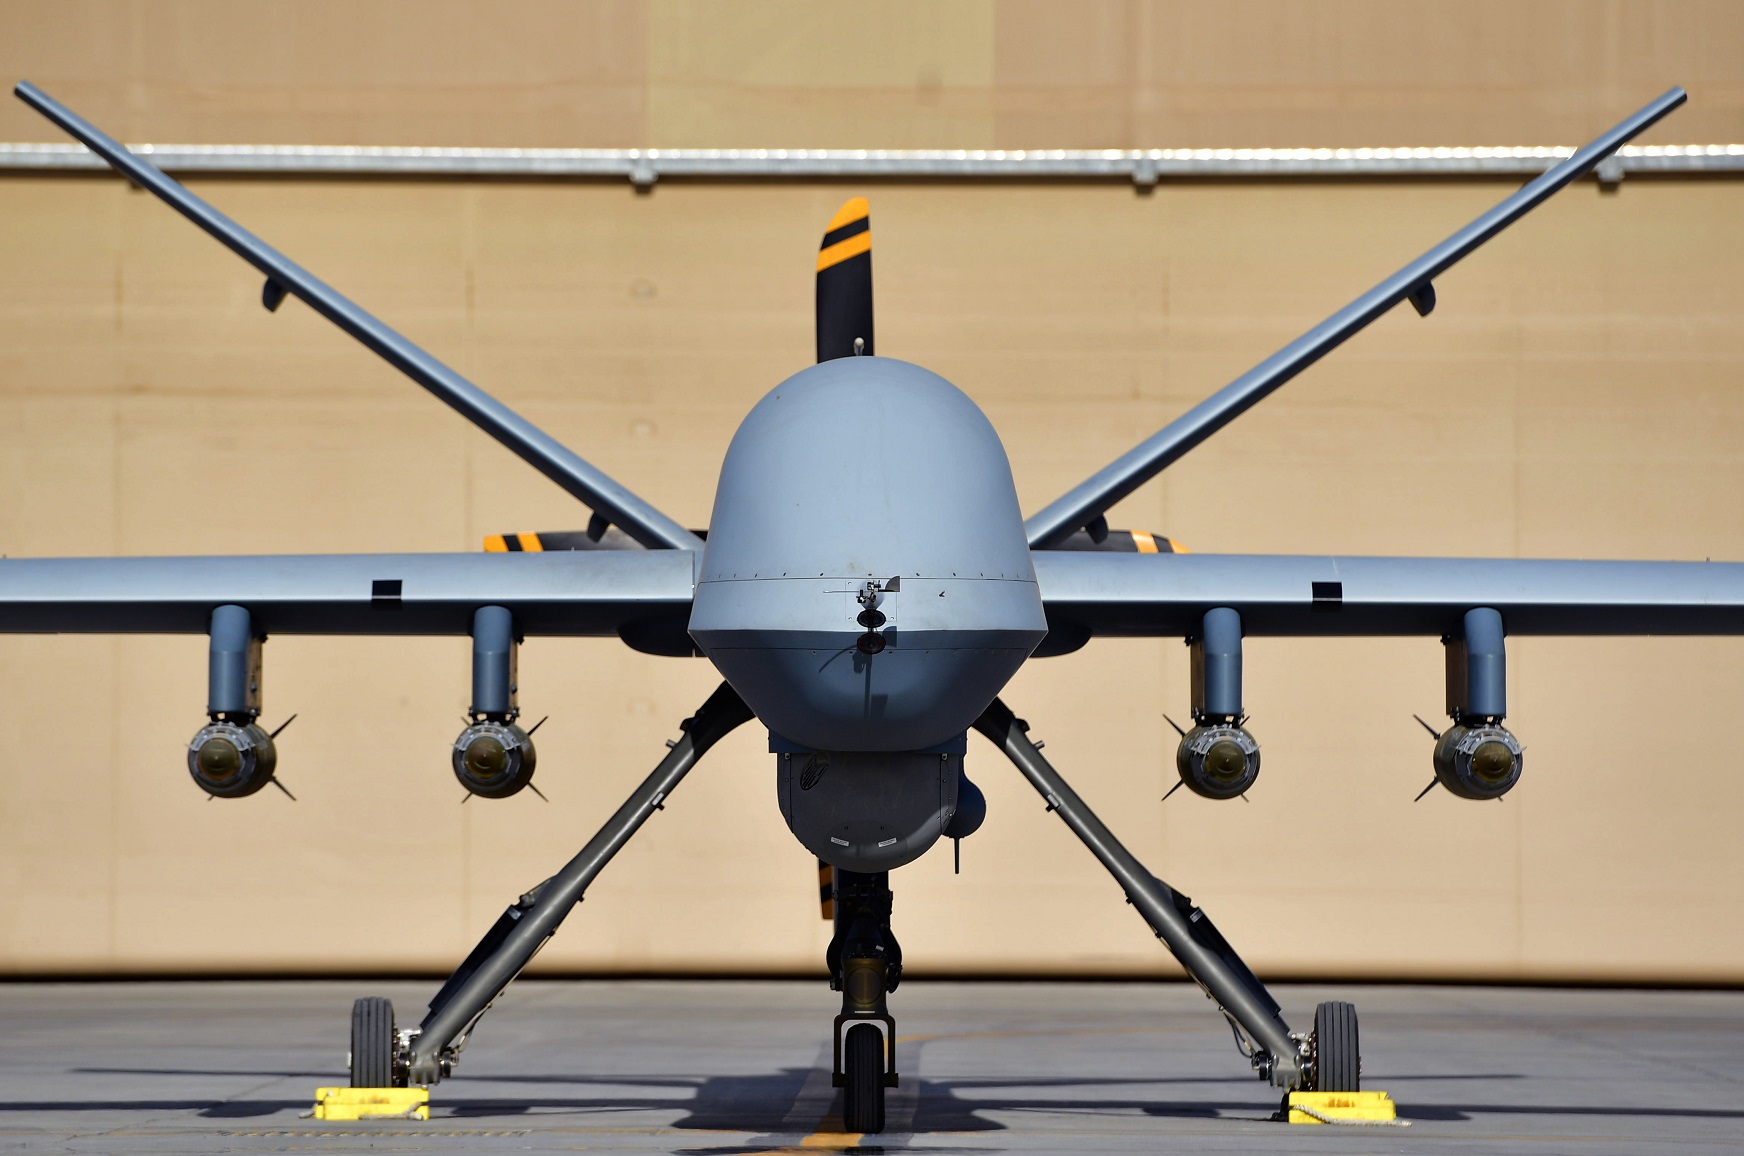 Australia cleared to buy combat drones with serious airstrike capabilities